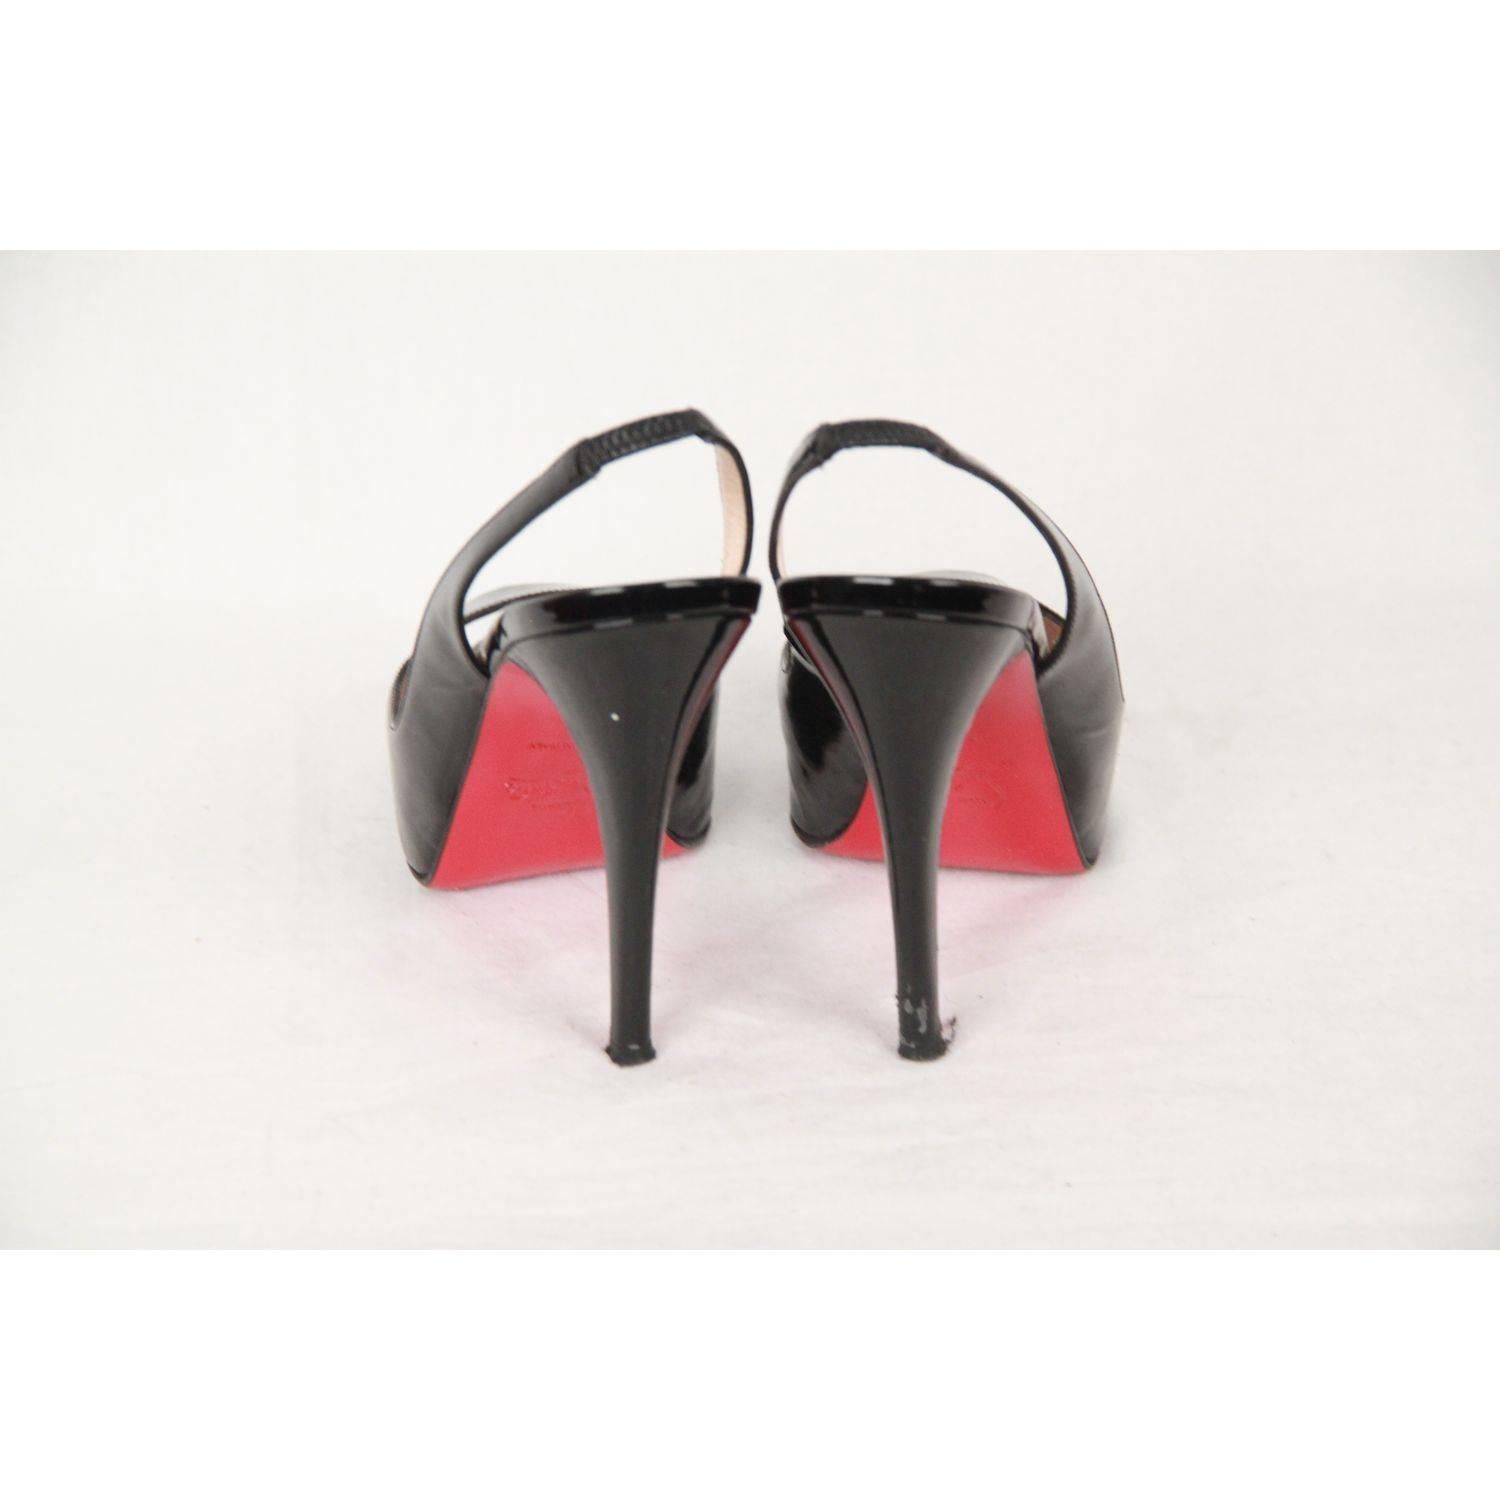 - Mod.: FLO SLING 120mm
- Black Patent leather
- Peep-toe
- Stretch-inset slingback strap provides secure fit
- 4 3/4 inches - 120mm covered heel
- Platform
- Leather lining & padded insole
- Signature Christian Louboutin red leather outsole
-